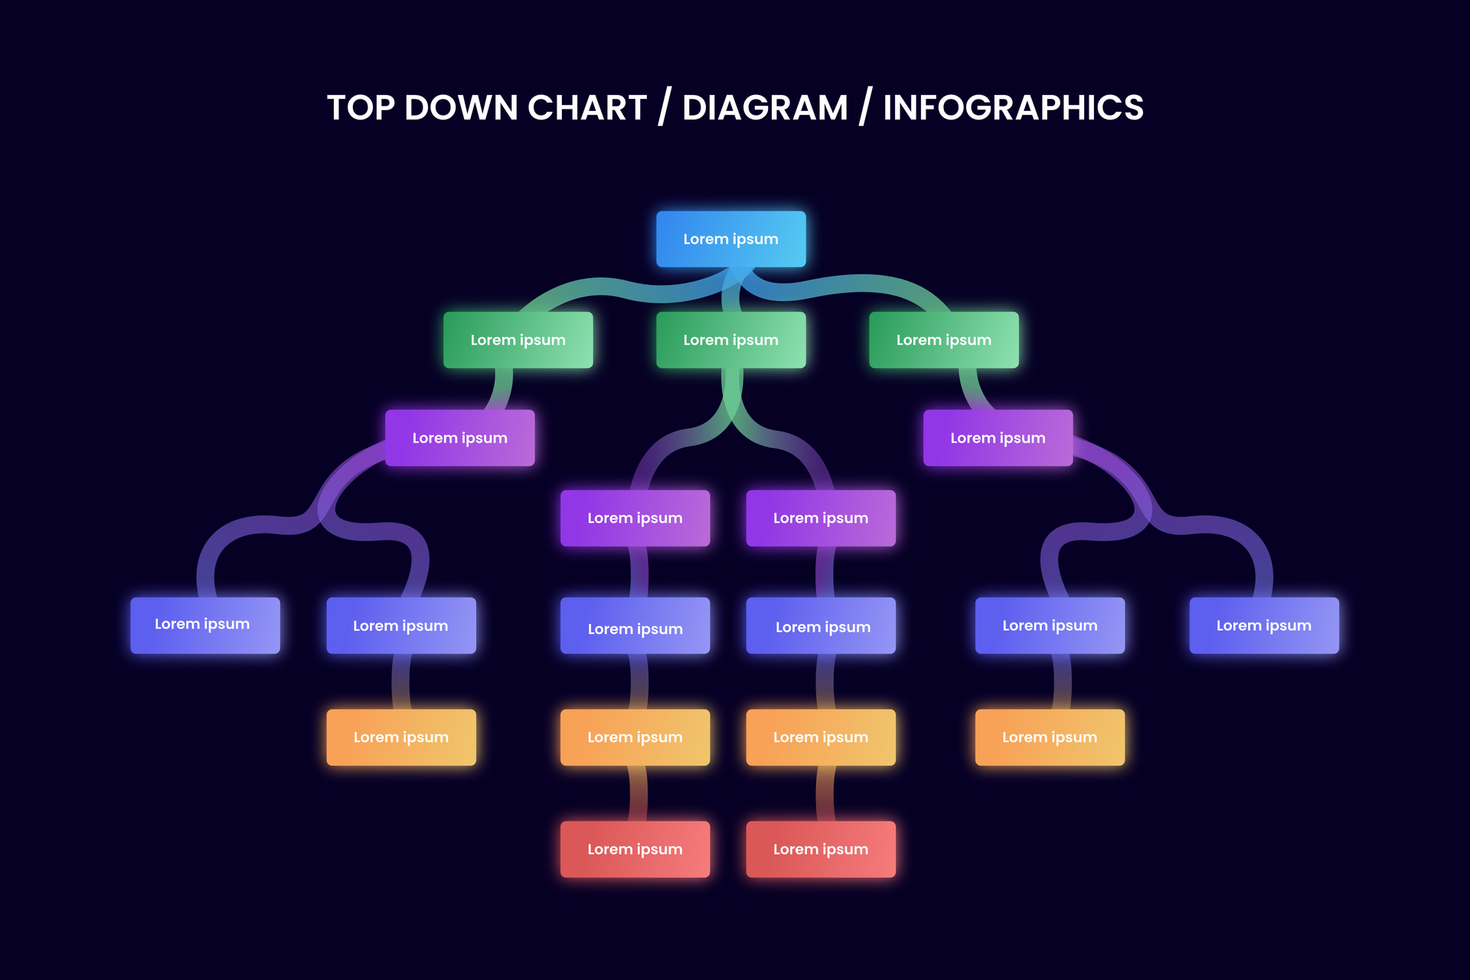 Top Down Chart, Diagram, Infographic, vector illustration psd